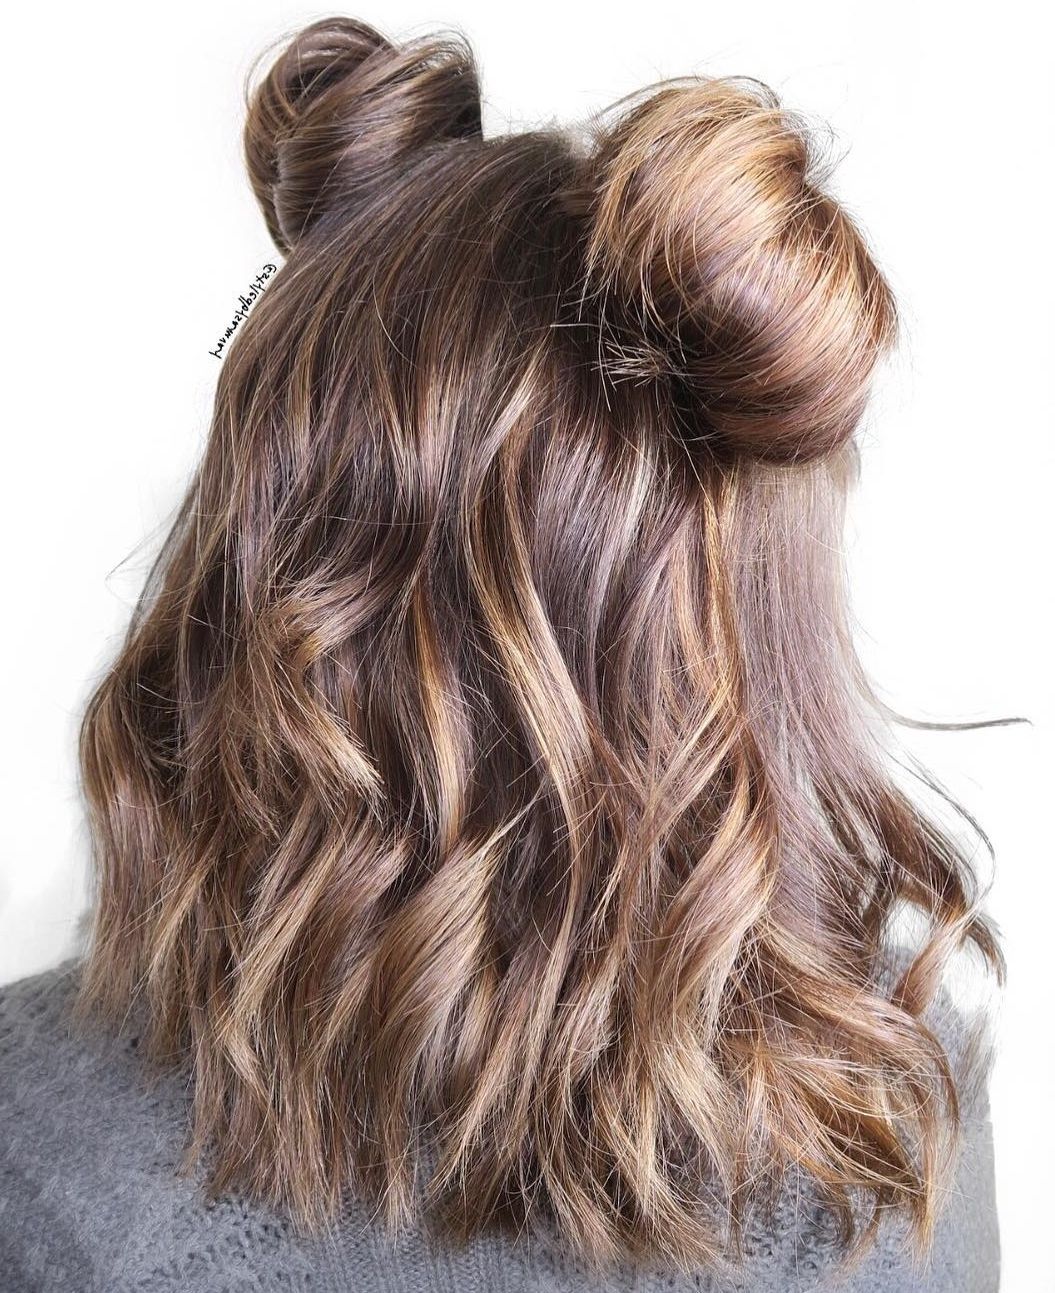 25 Must Try Medium Length Layered Haircuts For 2022 Pertaining To Most Up To Date Layered Medium Length Hairstyles With Space Buns (View 4 of 20)